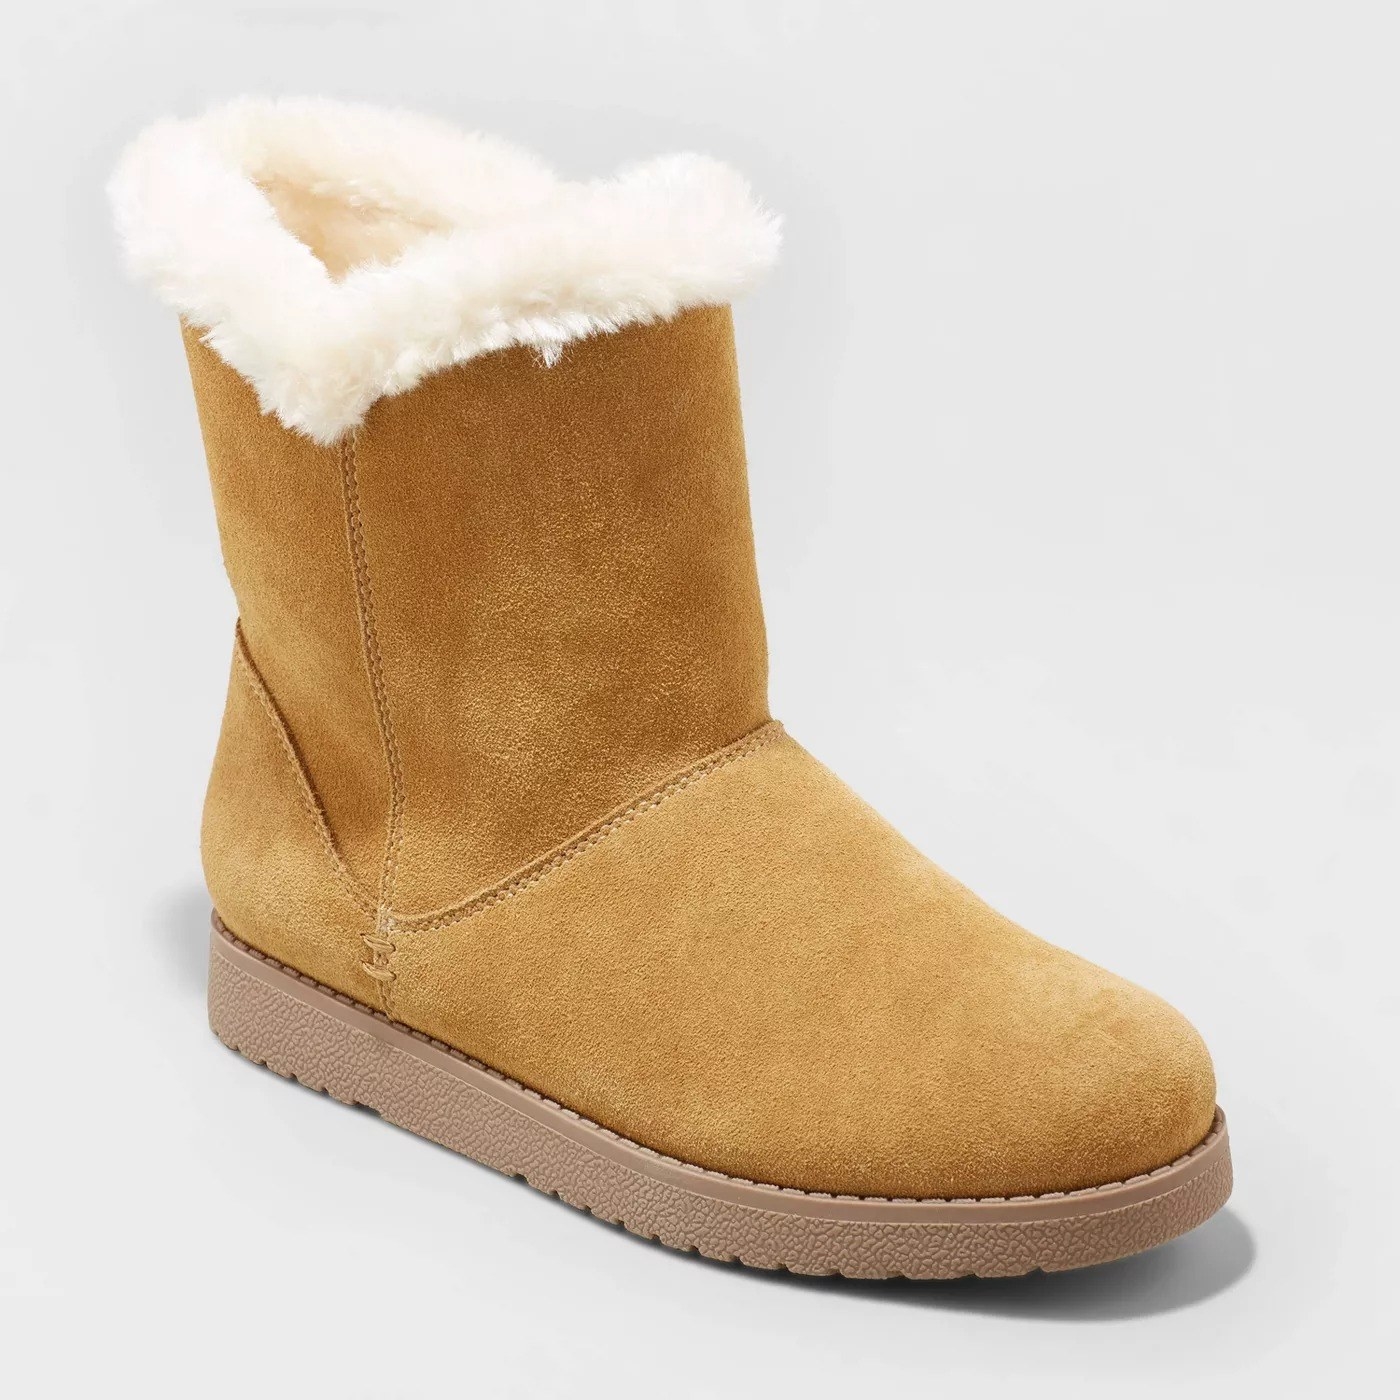 Light camel colored boots with off-white fur around the inside of the shoe